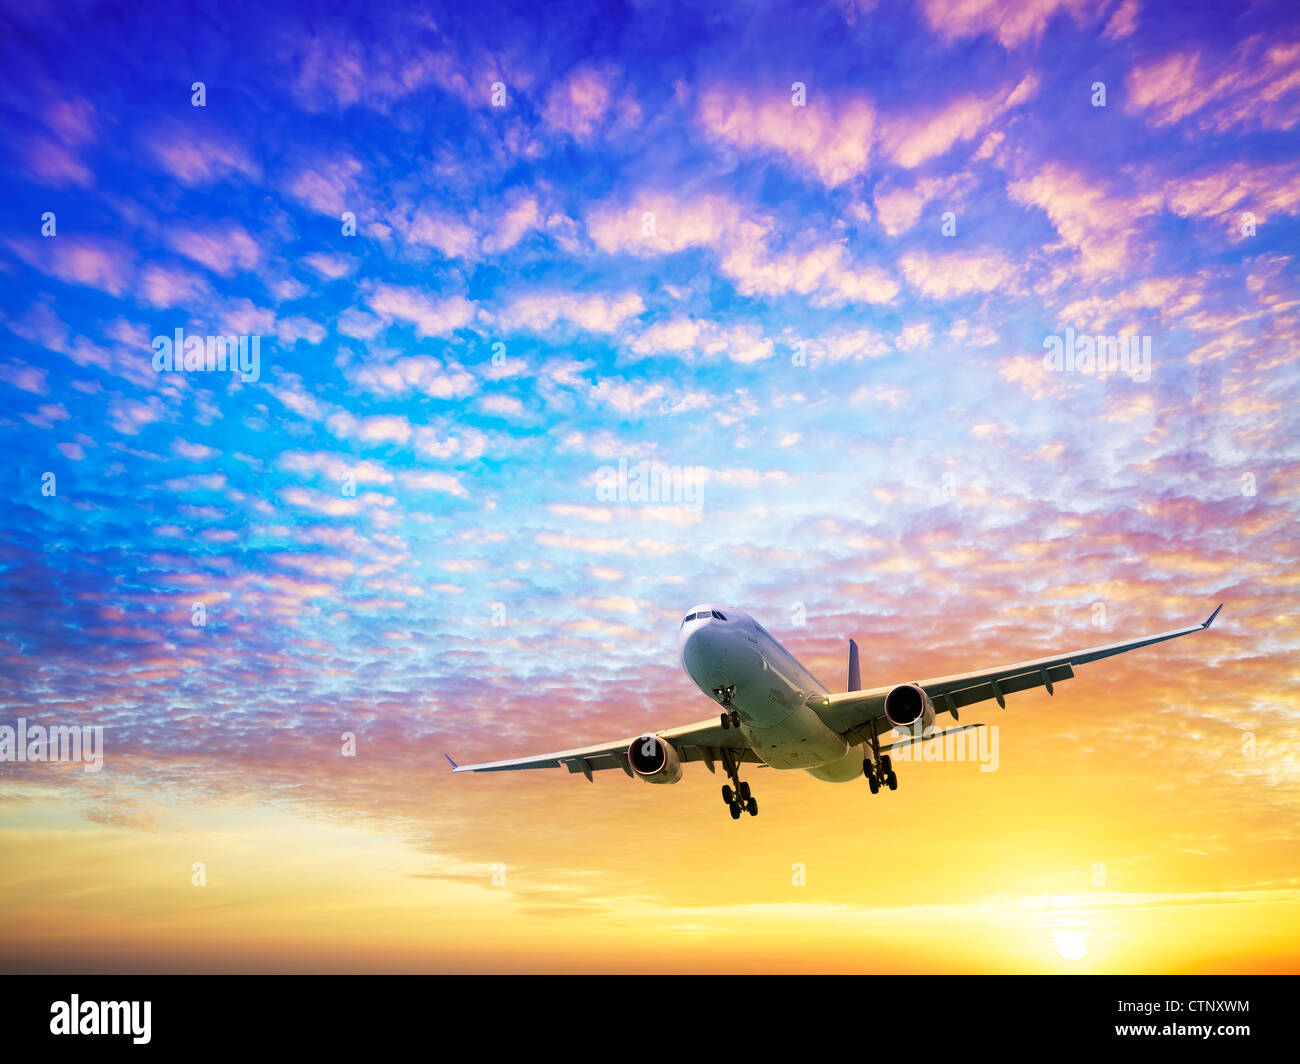 Jet plane in a sky at sunset time Stock Photo